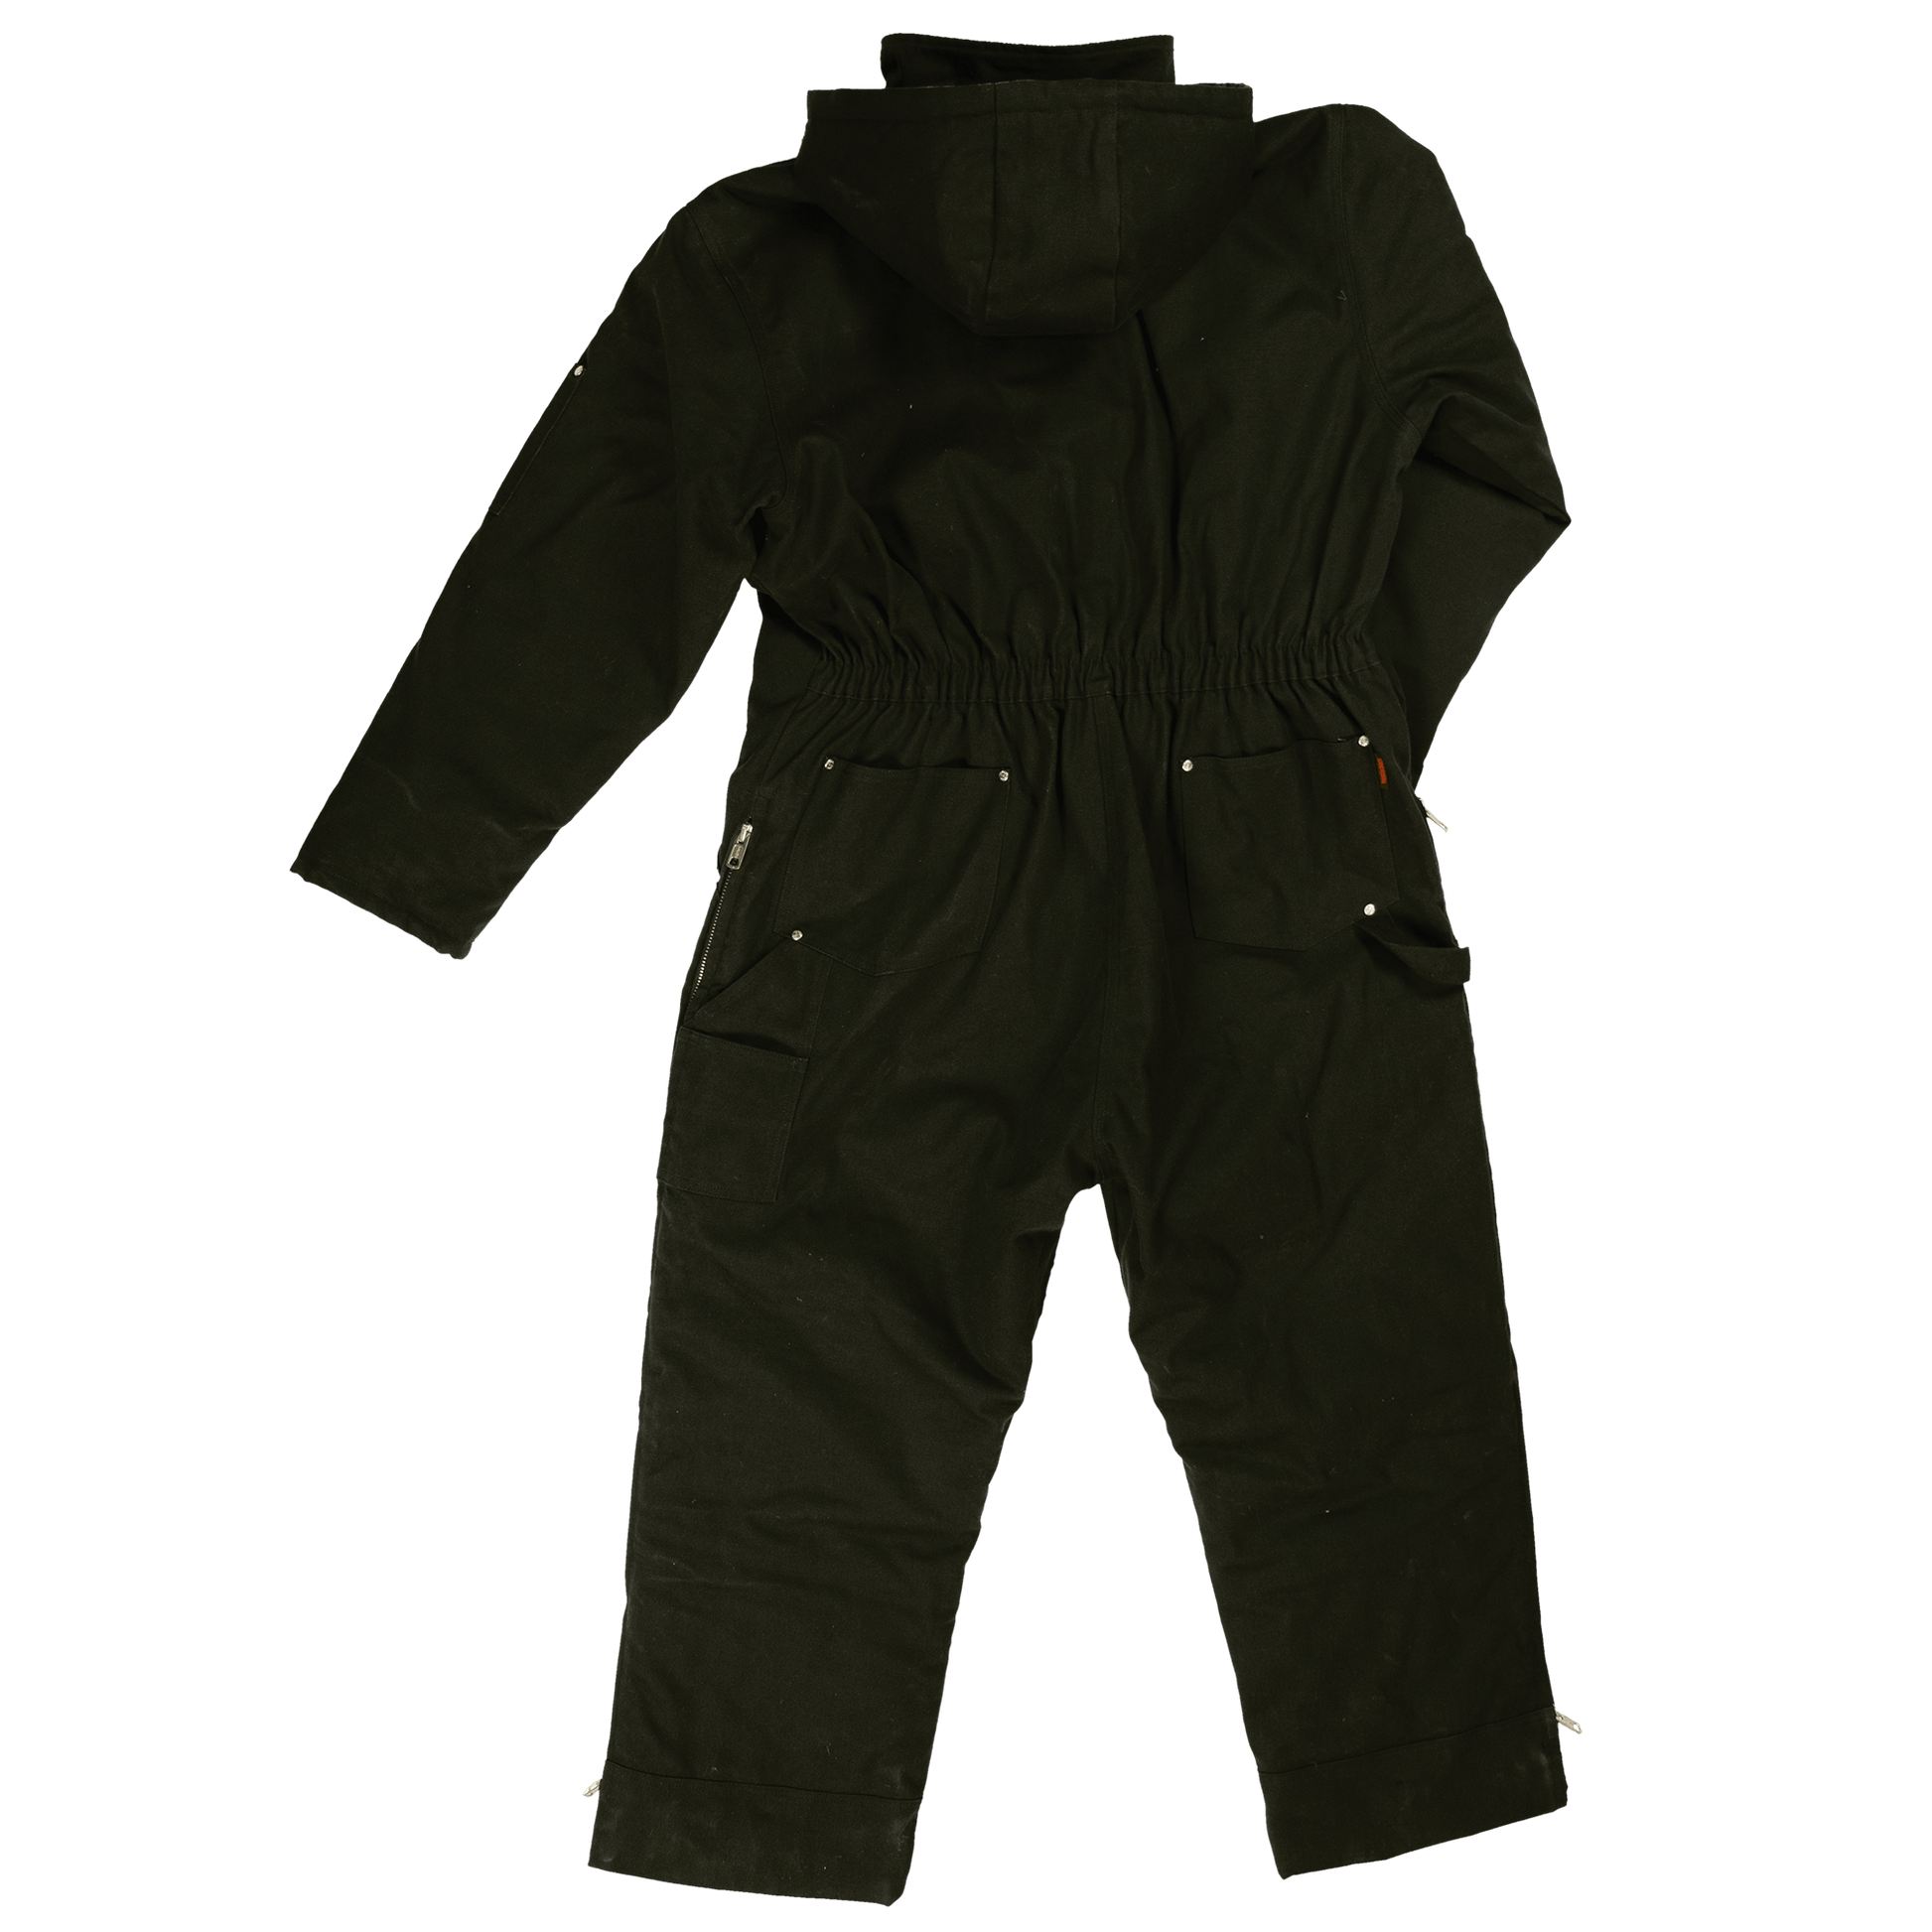 Tough Duck Insulated Duck Coverall - WC01 - Black - back